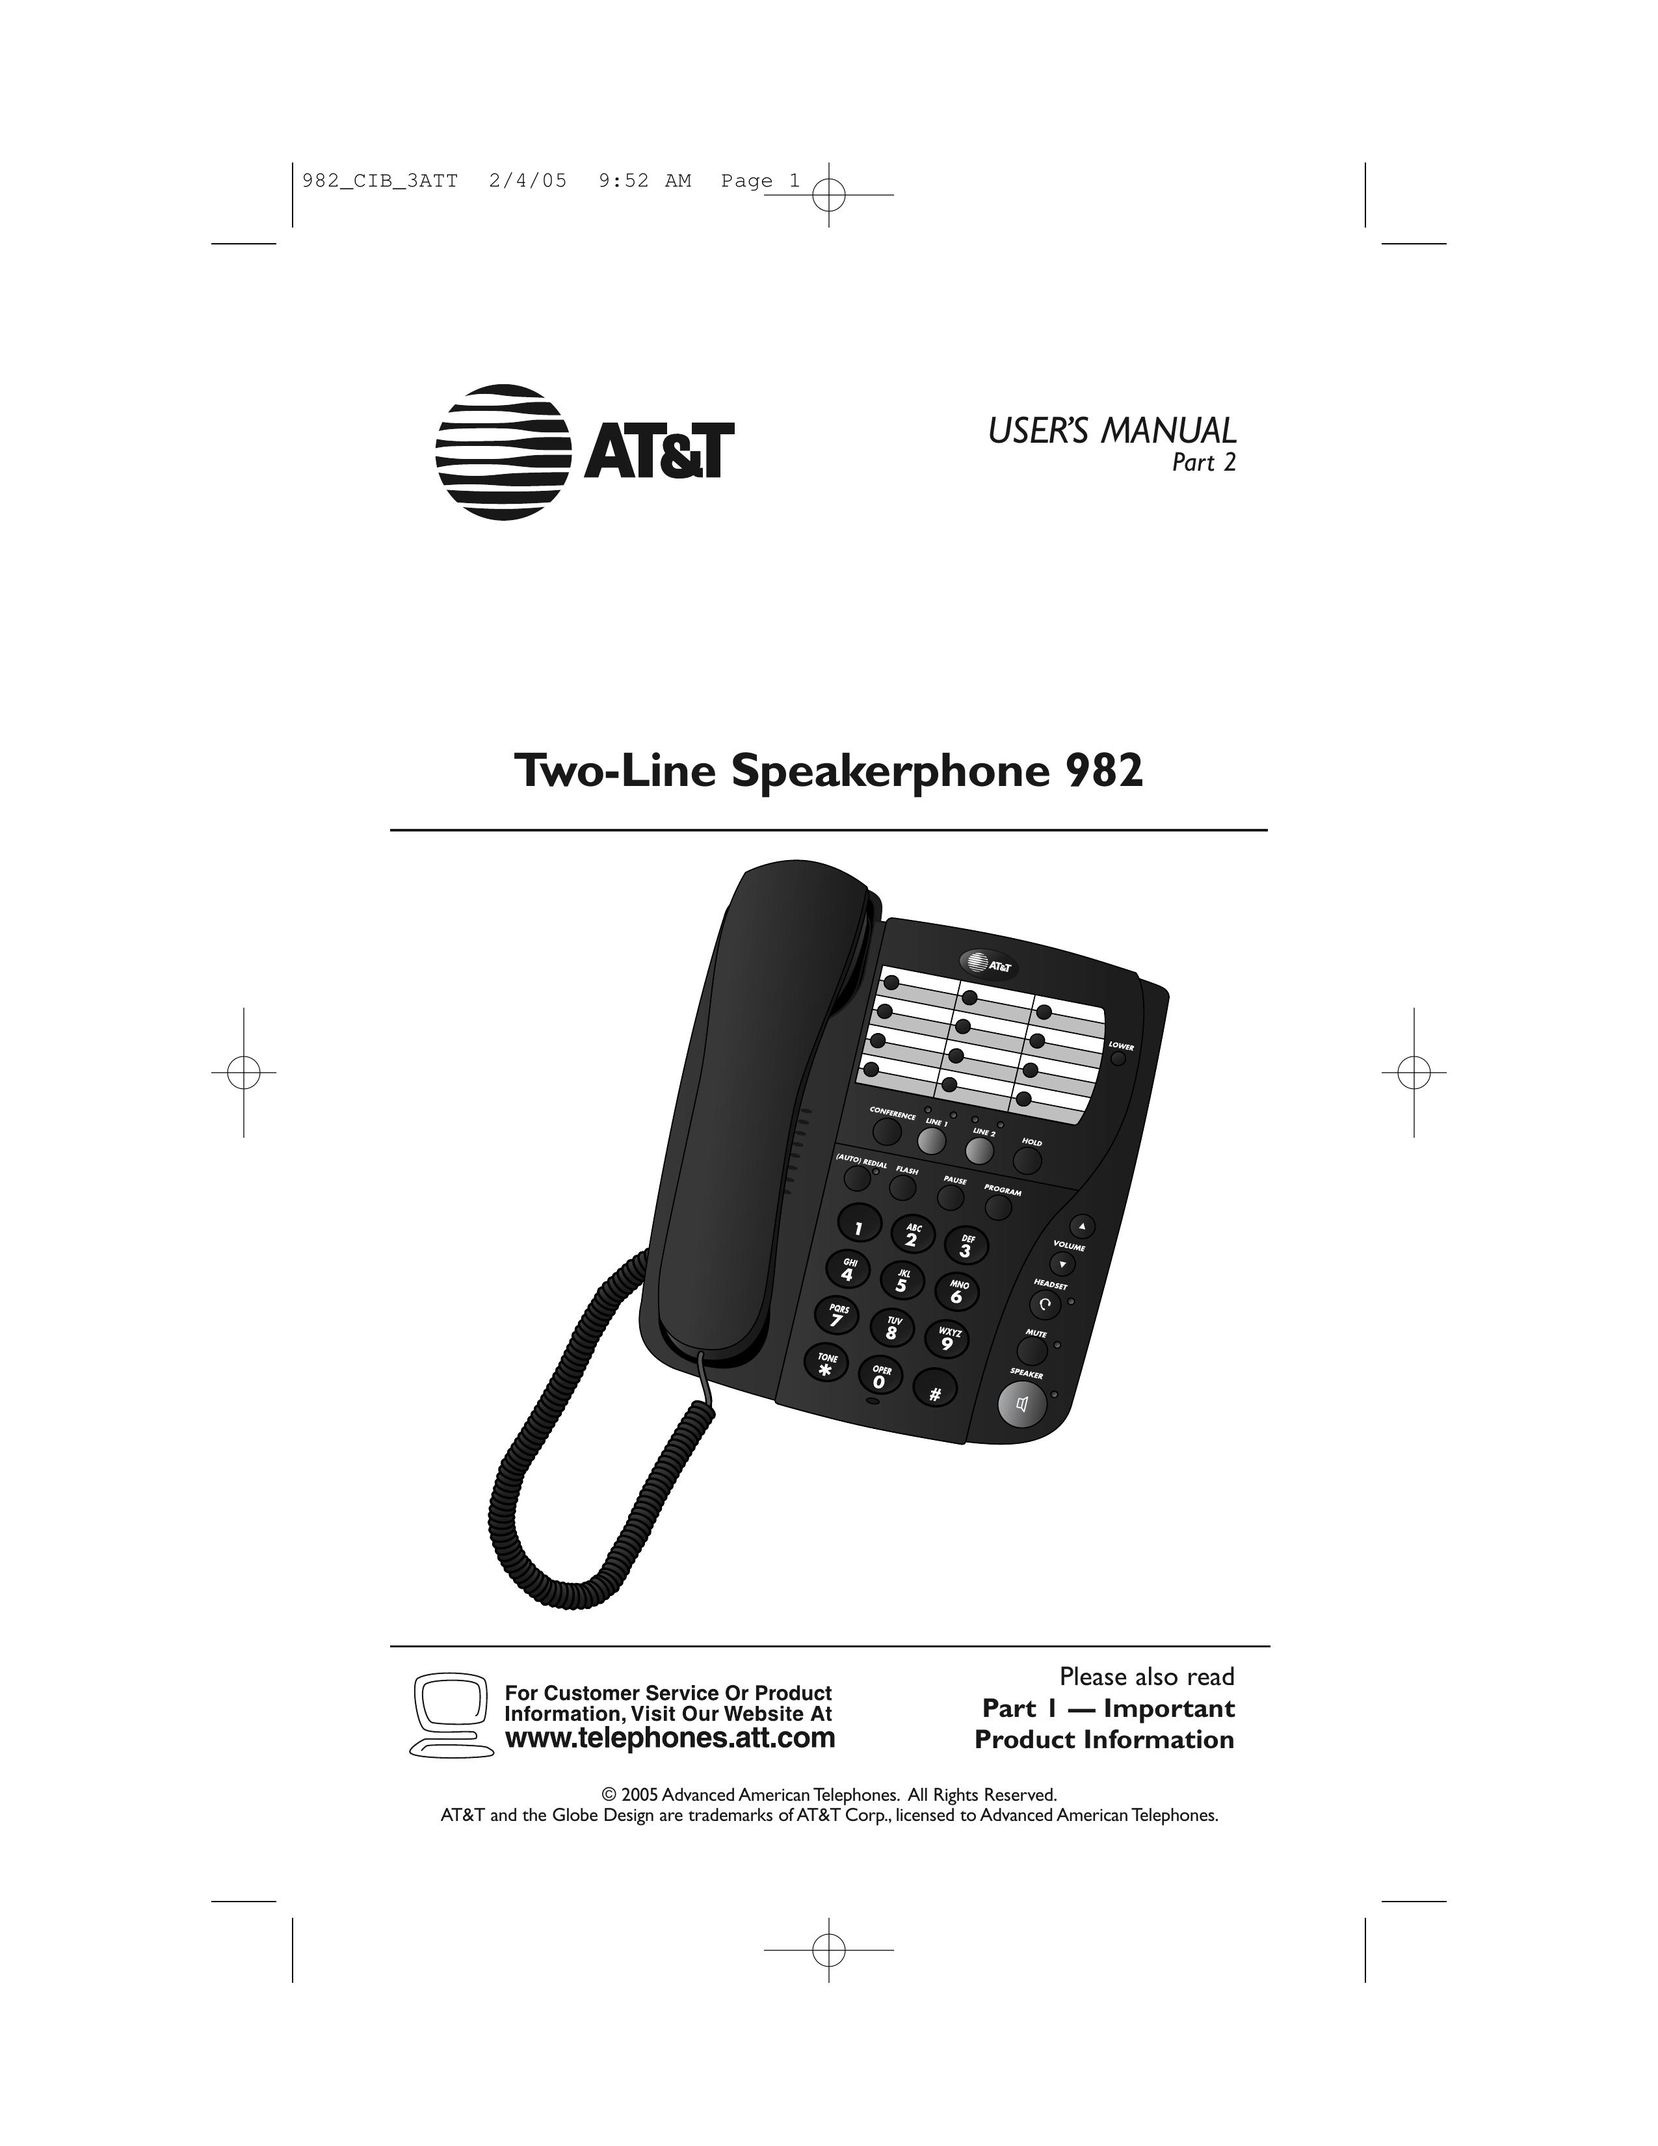 AT&T 982 Conference Phone User Manual